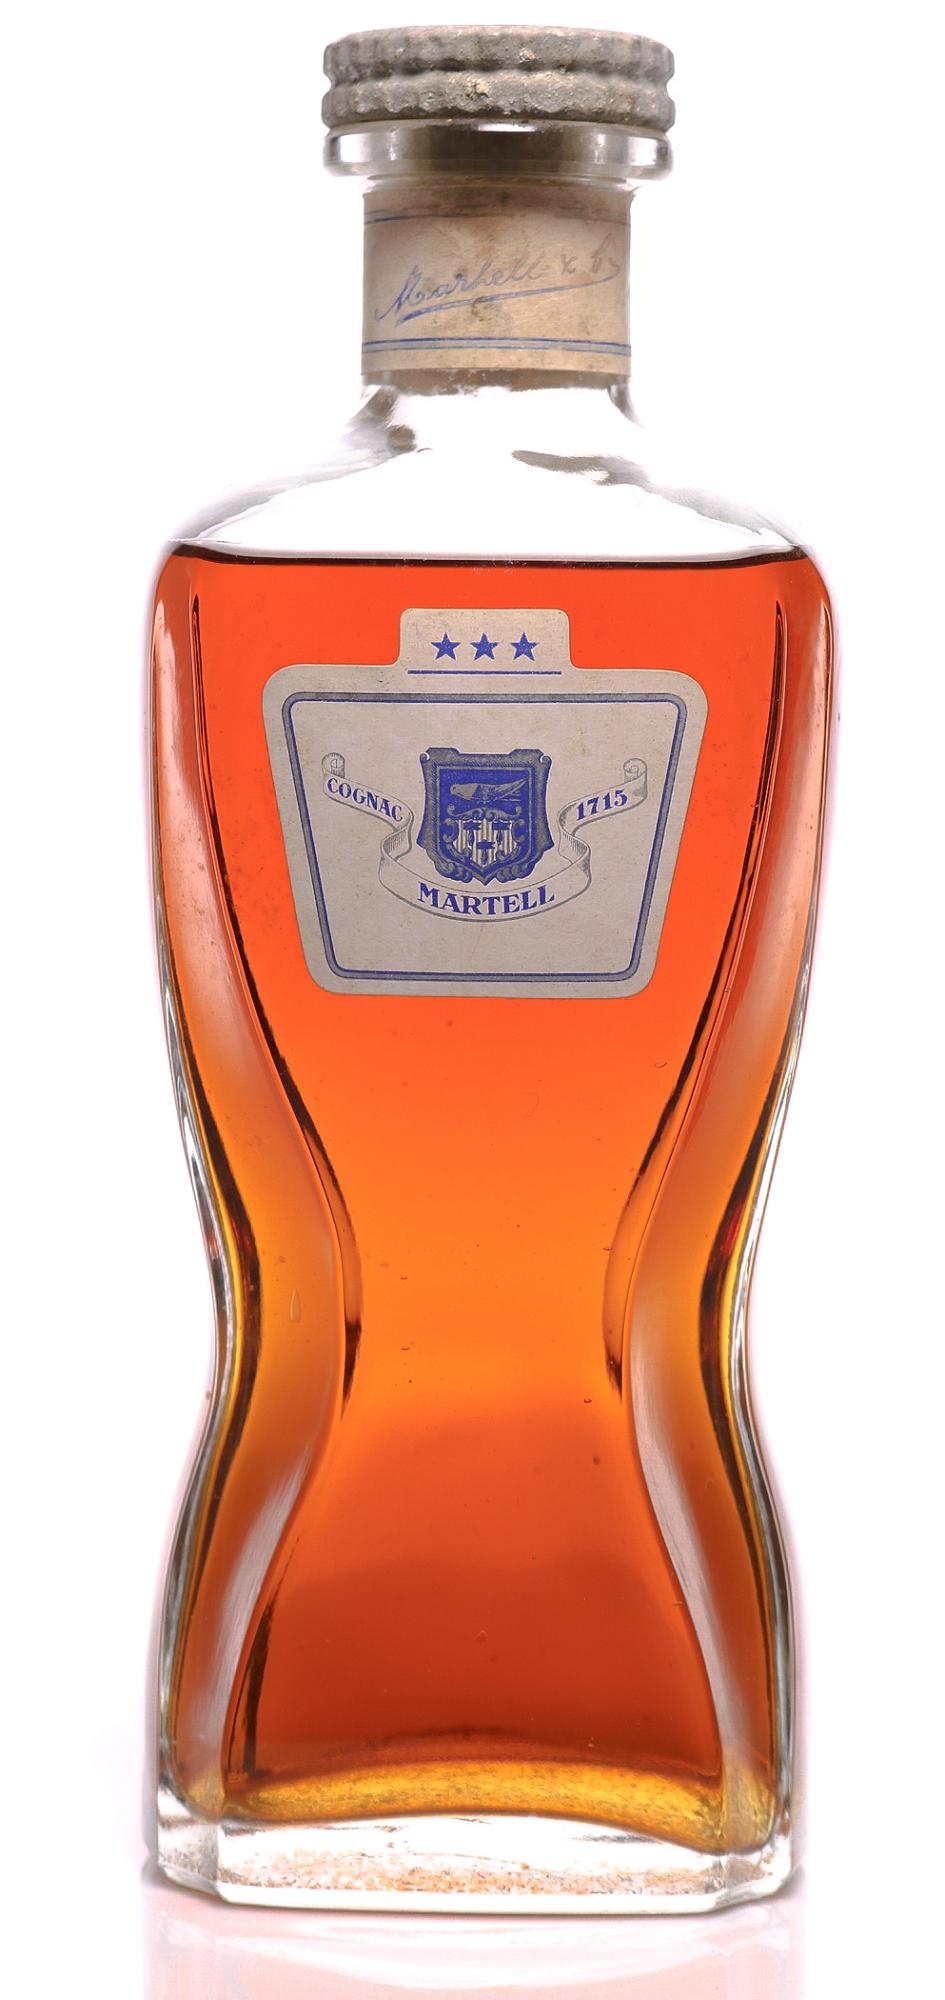 Martell Cognac 3 Star Very Old Pale 1960s - Decanter - Rue Pinard